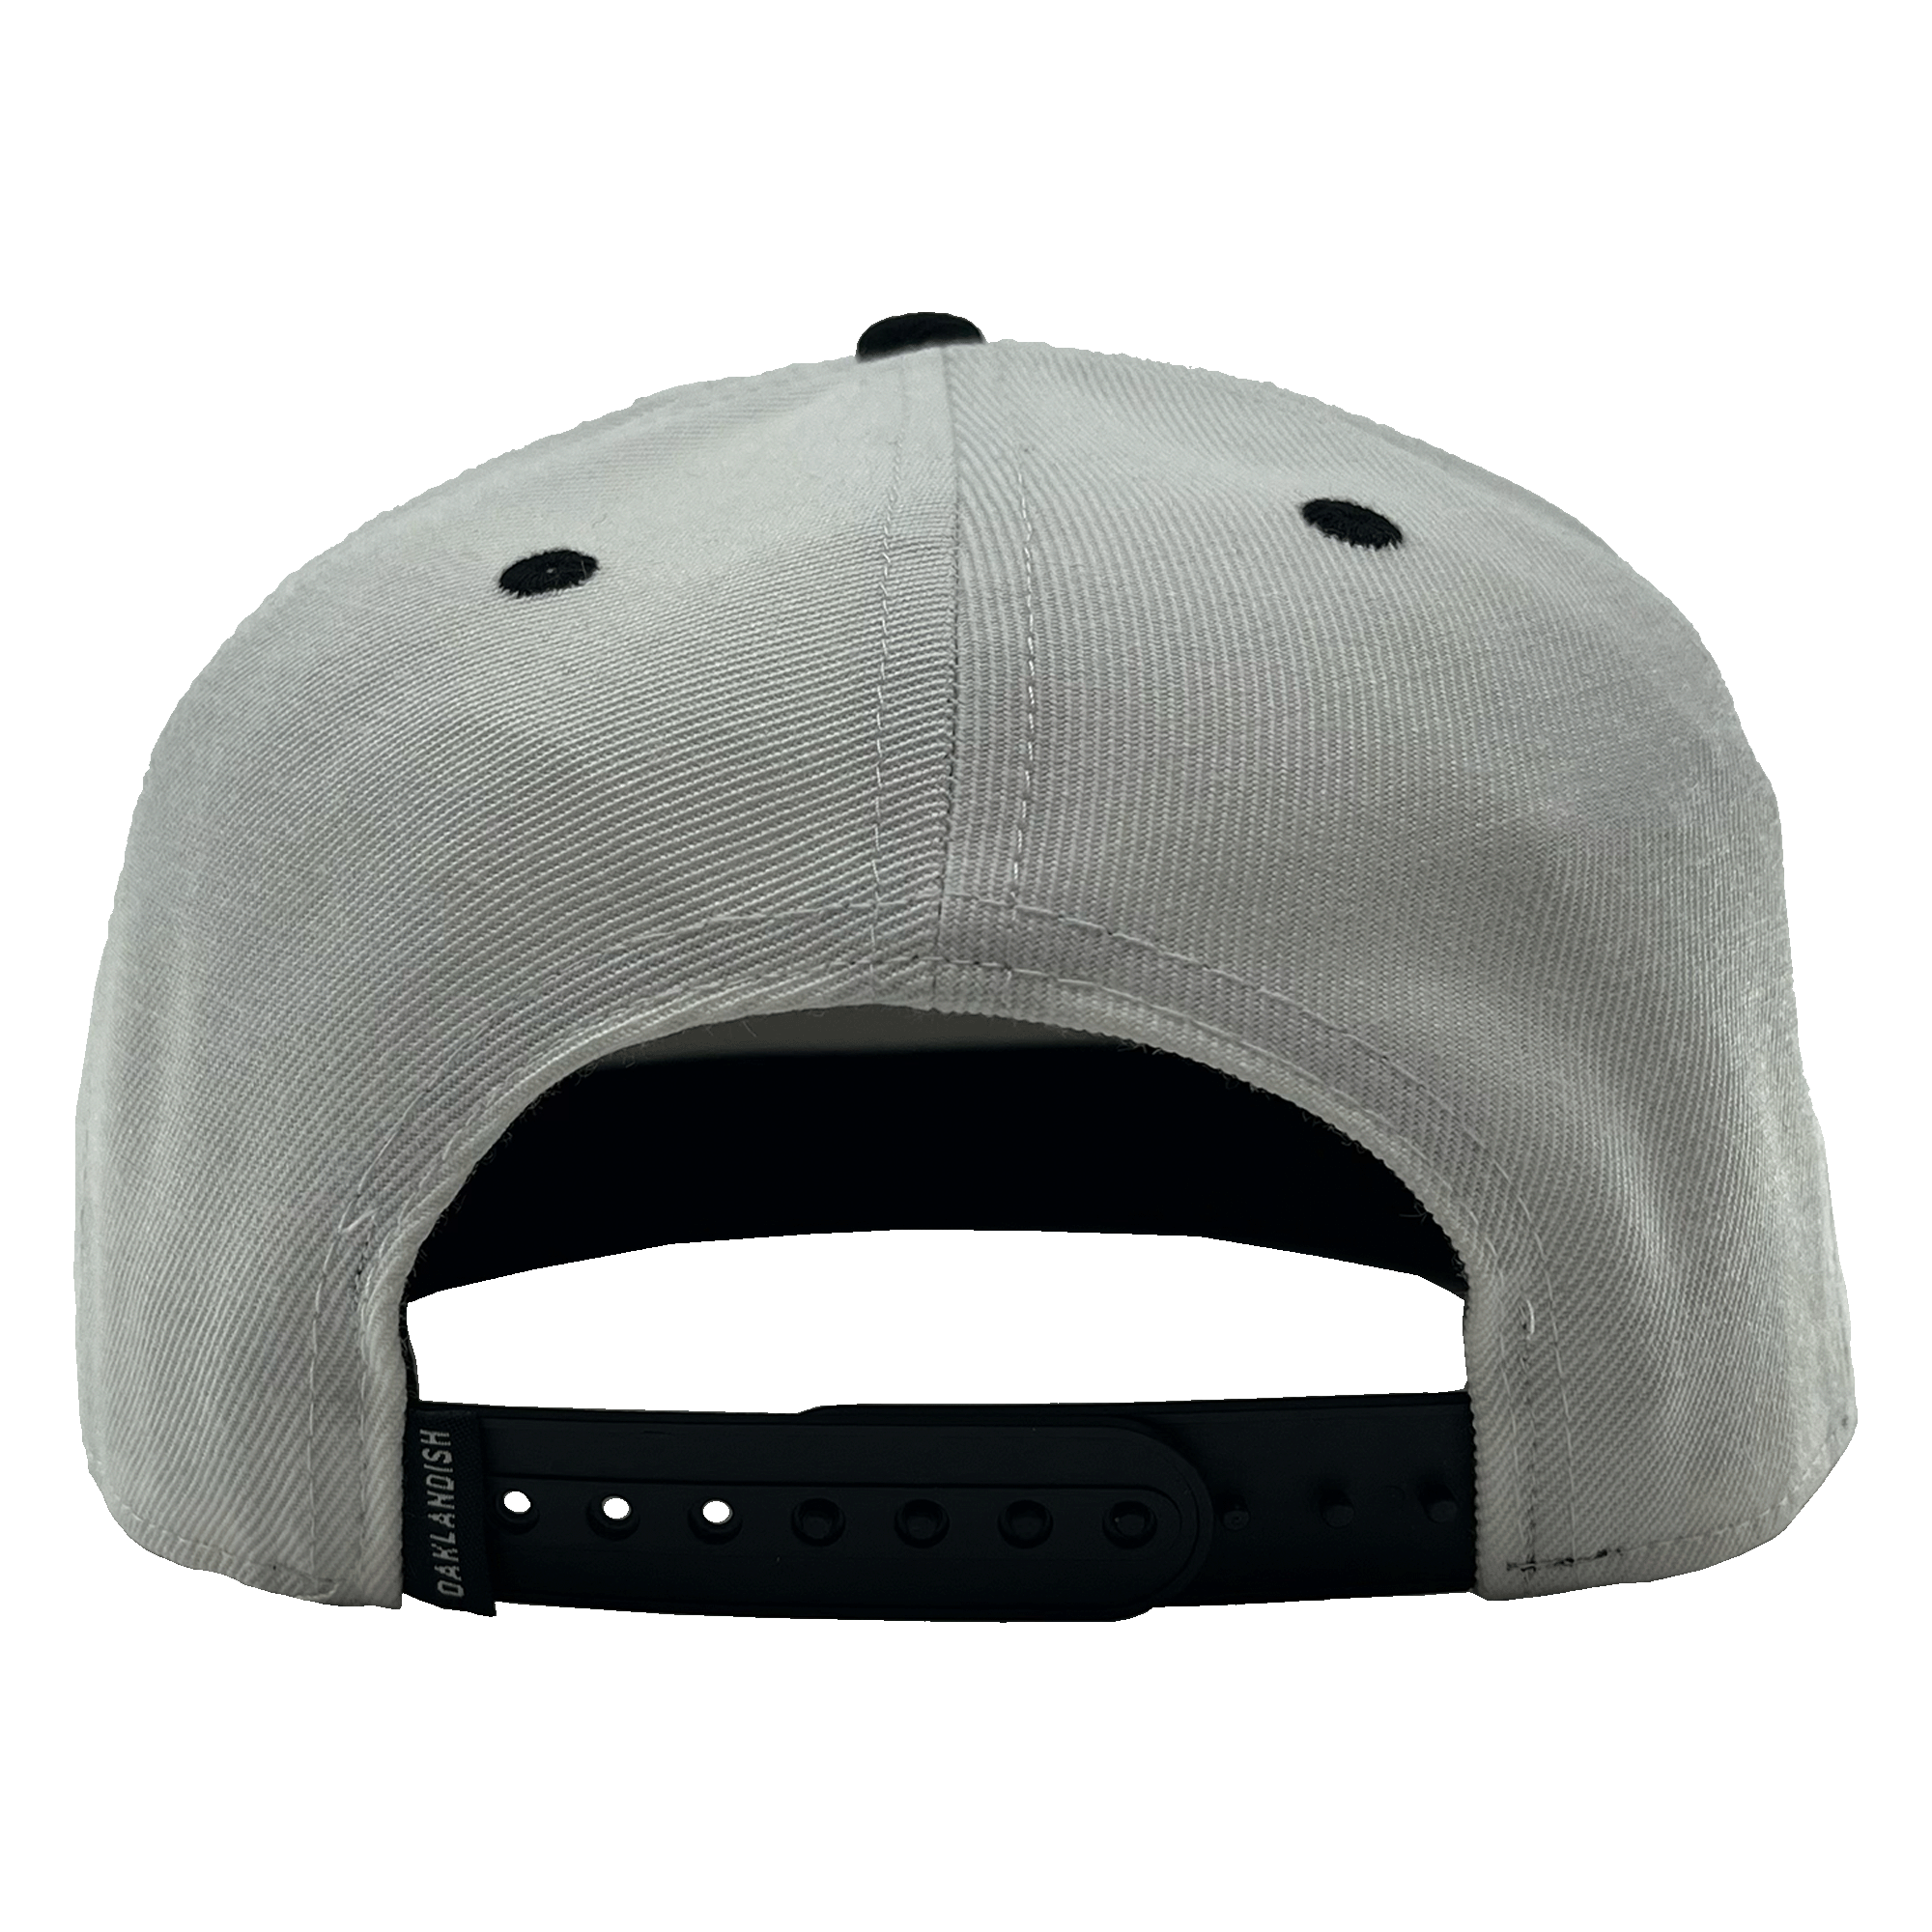 Back view of white hat with black snapback closure and small Oaklandish logo with black embroidered details on the crown.